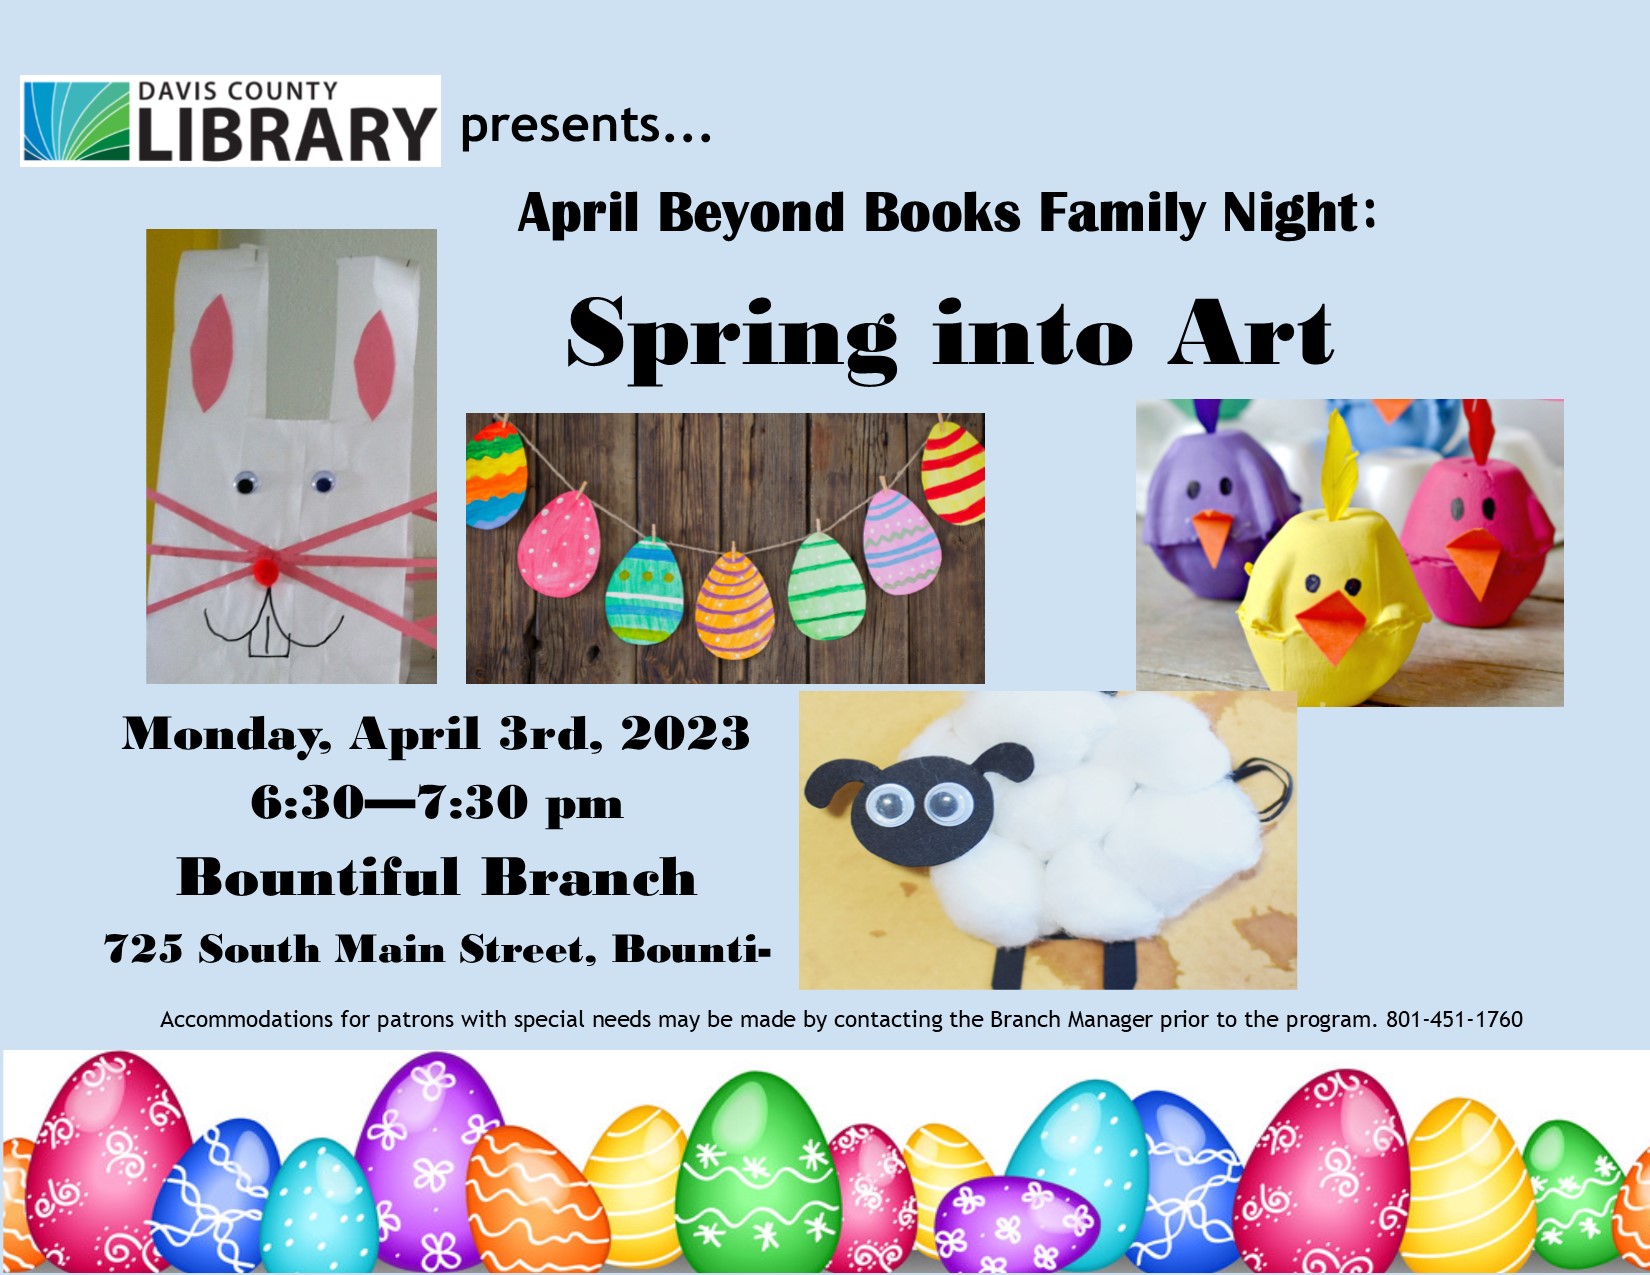 Monday April 3 - Family Art Night at the Bountiful Library.  Come create spring-themed art to celebrate the season.  6:30 pm